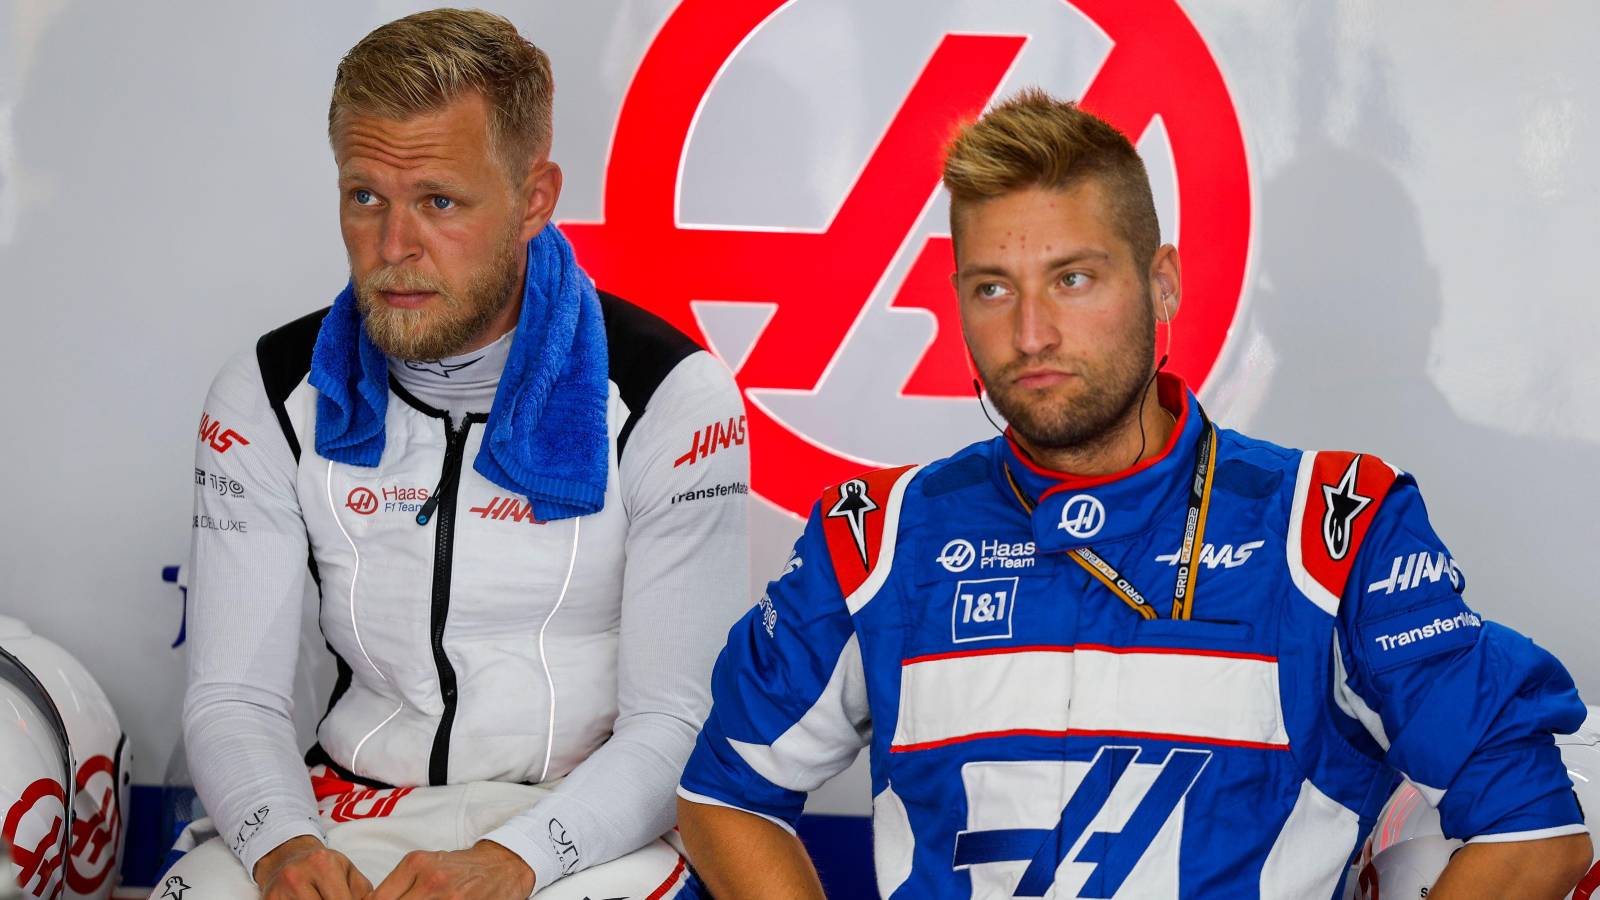 Kevin Magnussen sits with a Haas colleague. Paul Ricard July 2022.